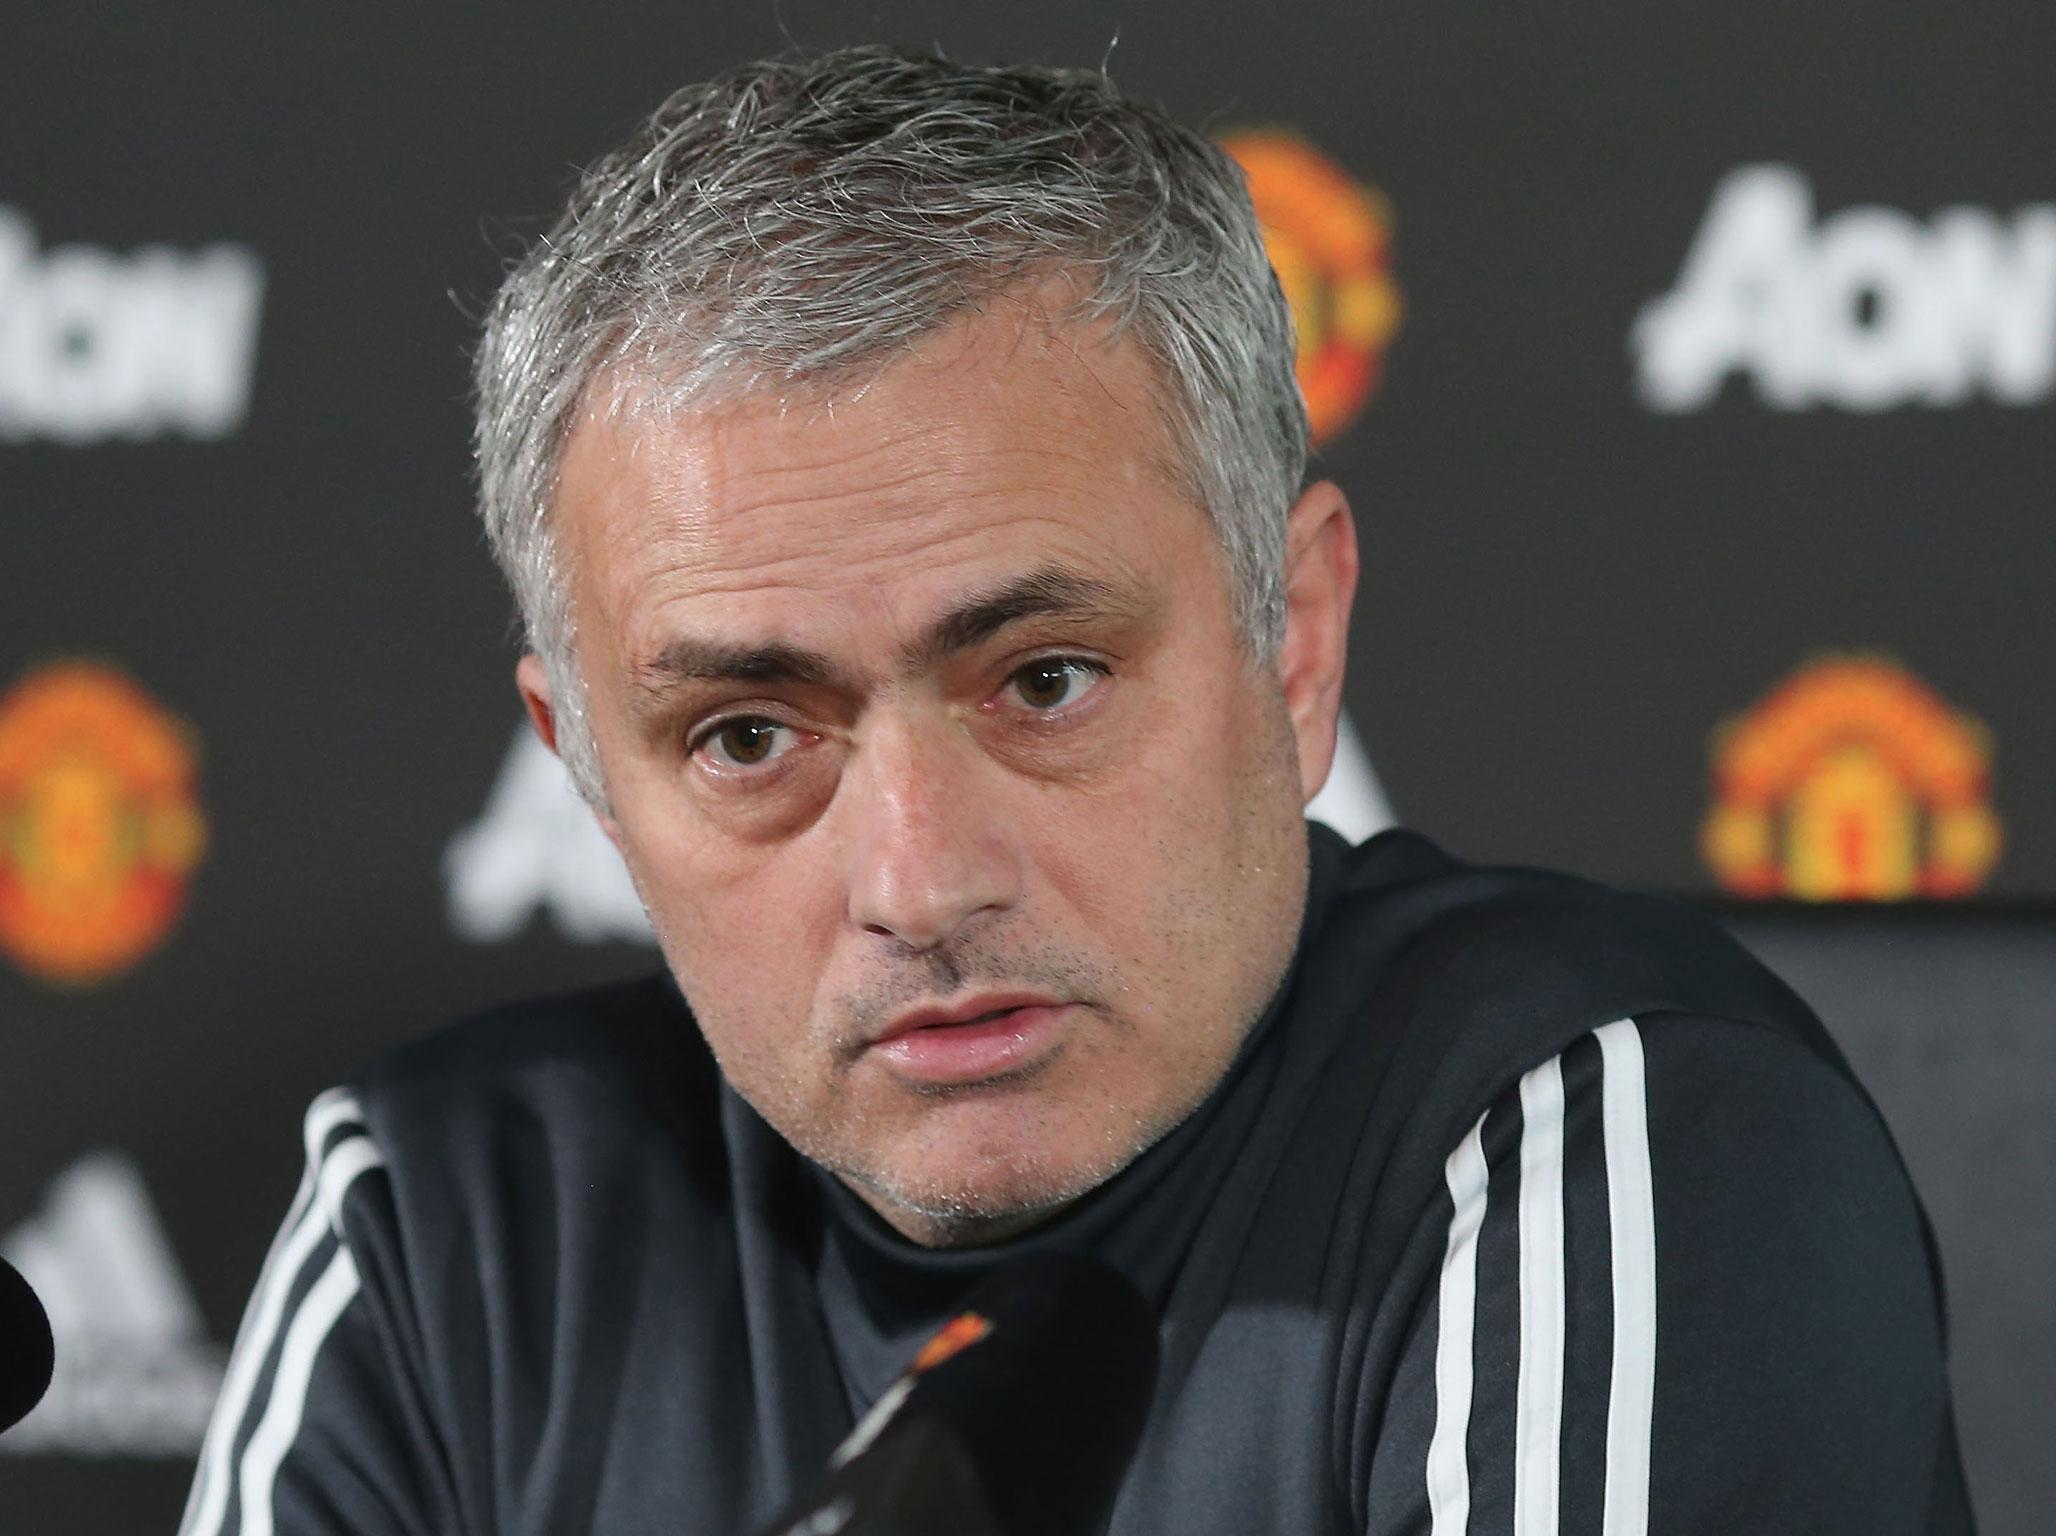 Jose Mourinho confirmed Fellaini and Carrick will likely be sidelined until the New Year